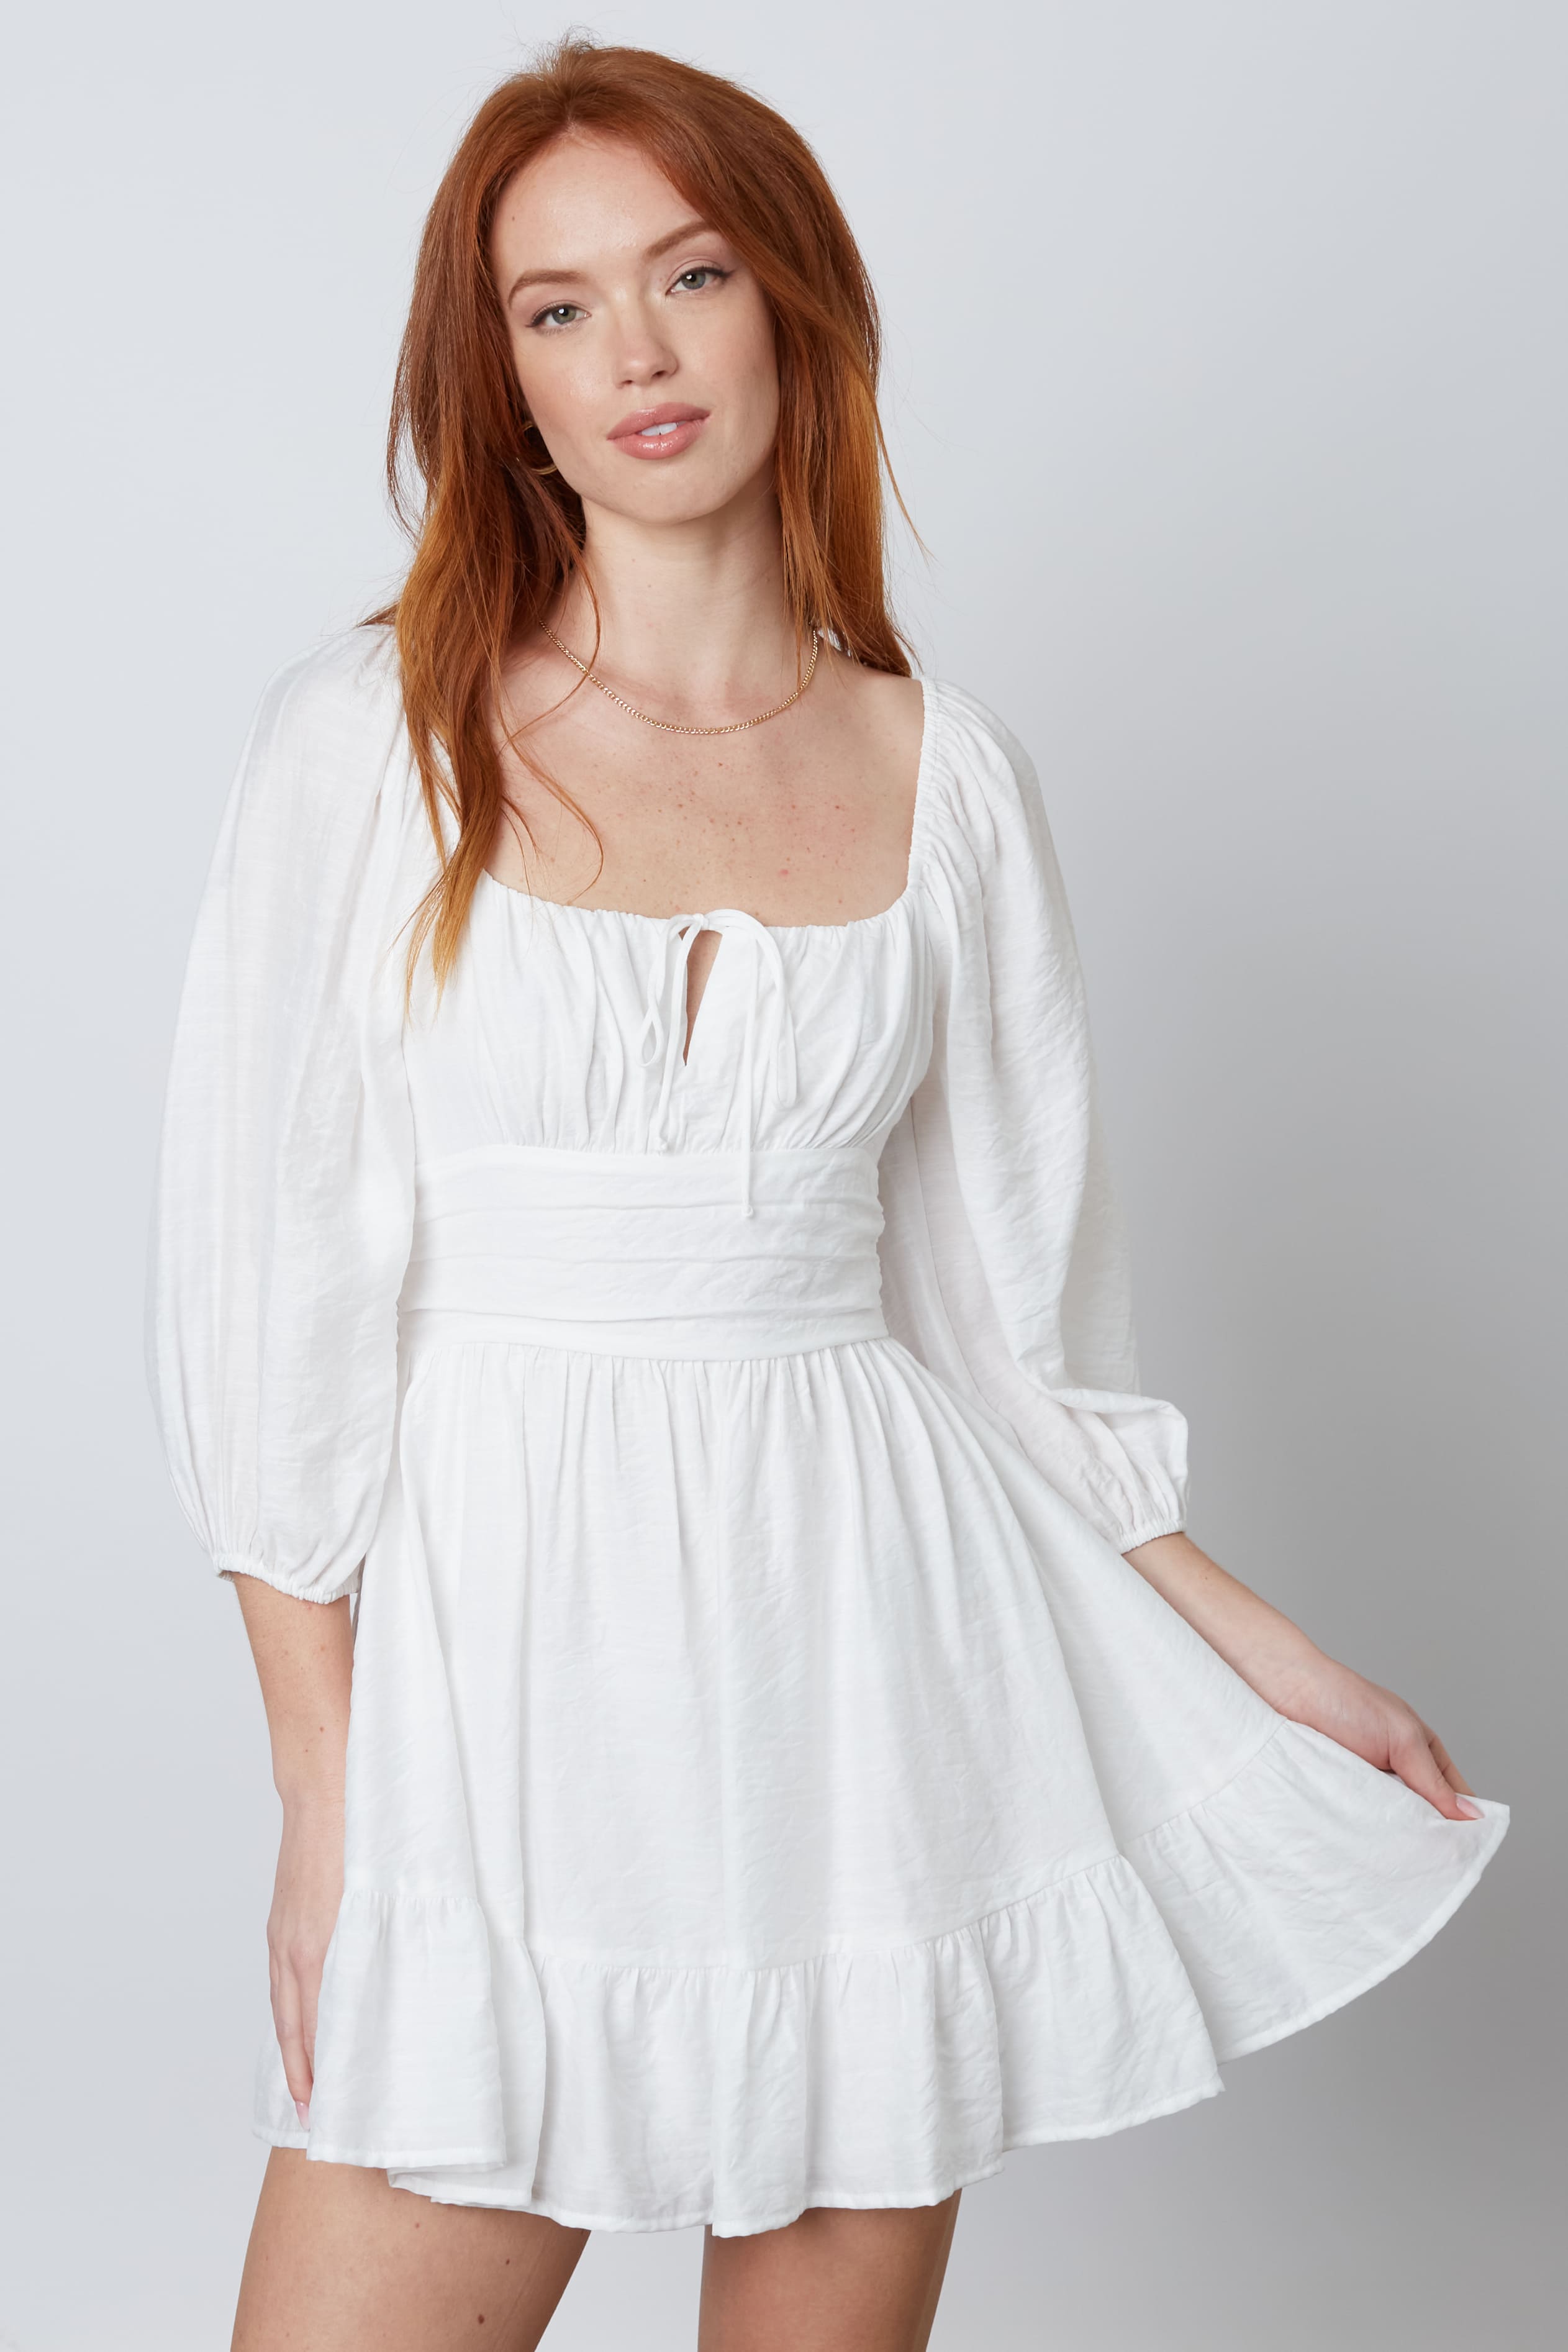 Baby Doll Mini Dress in White Front